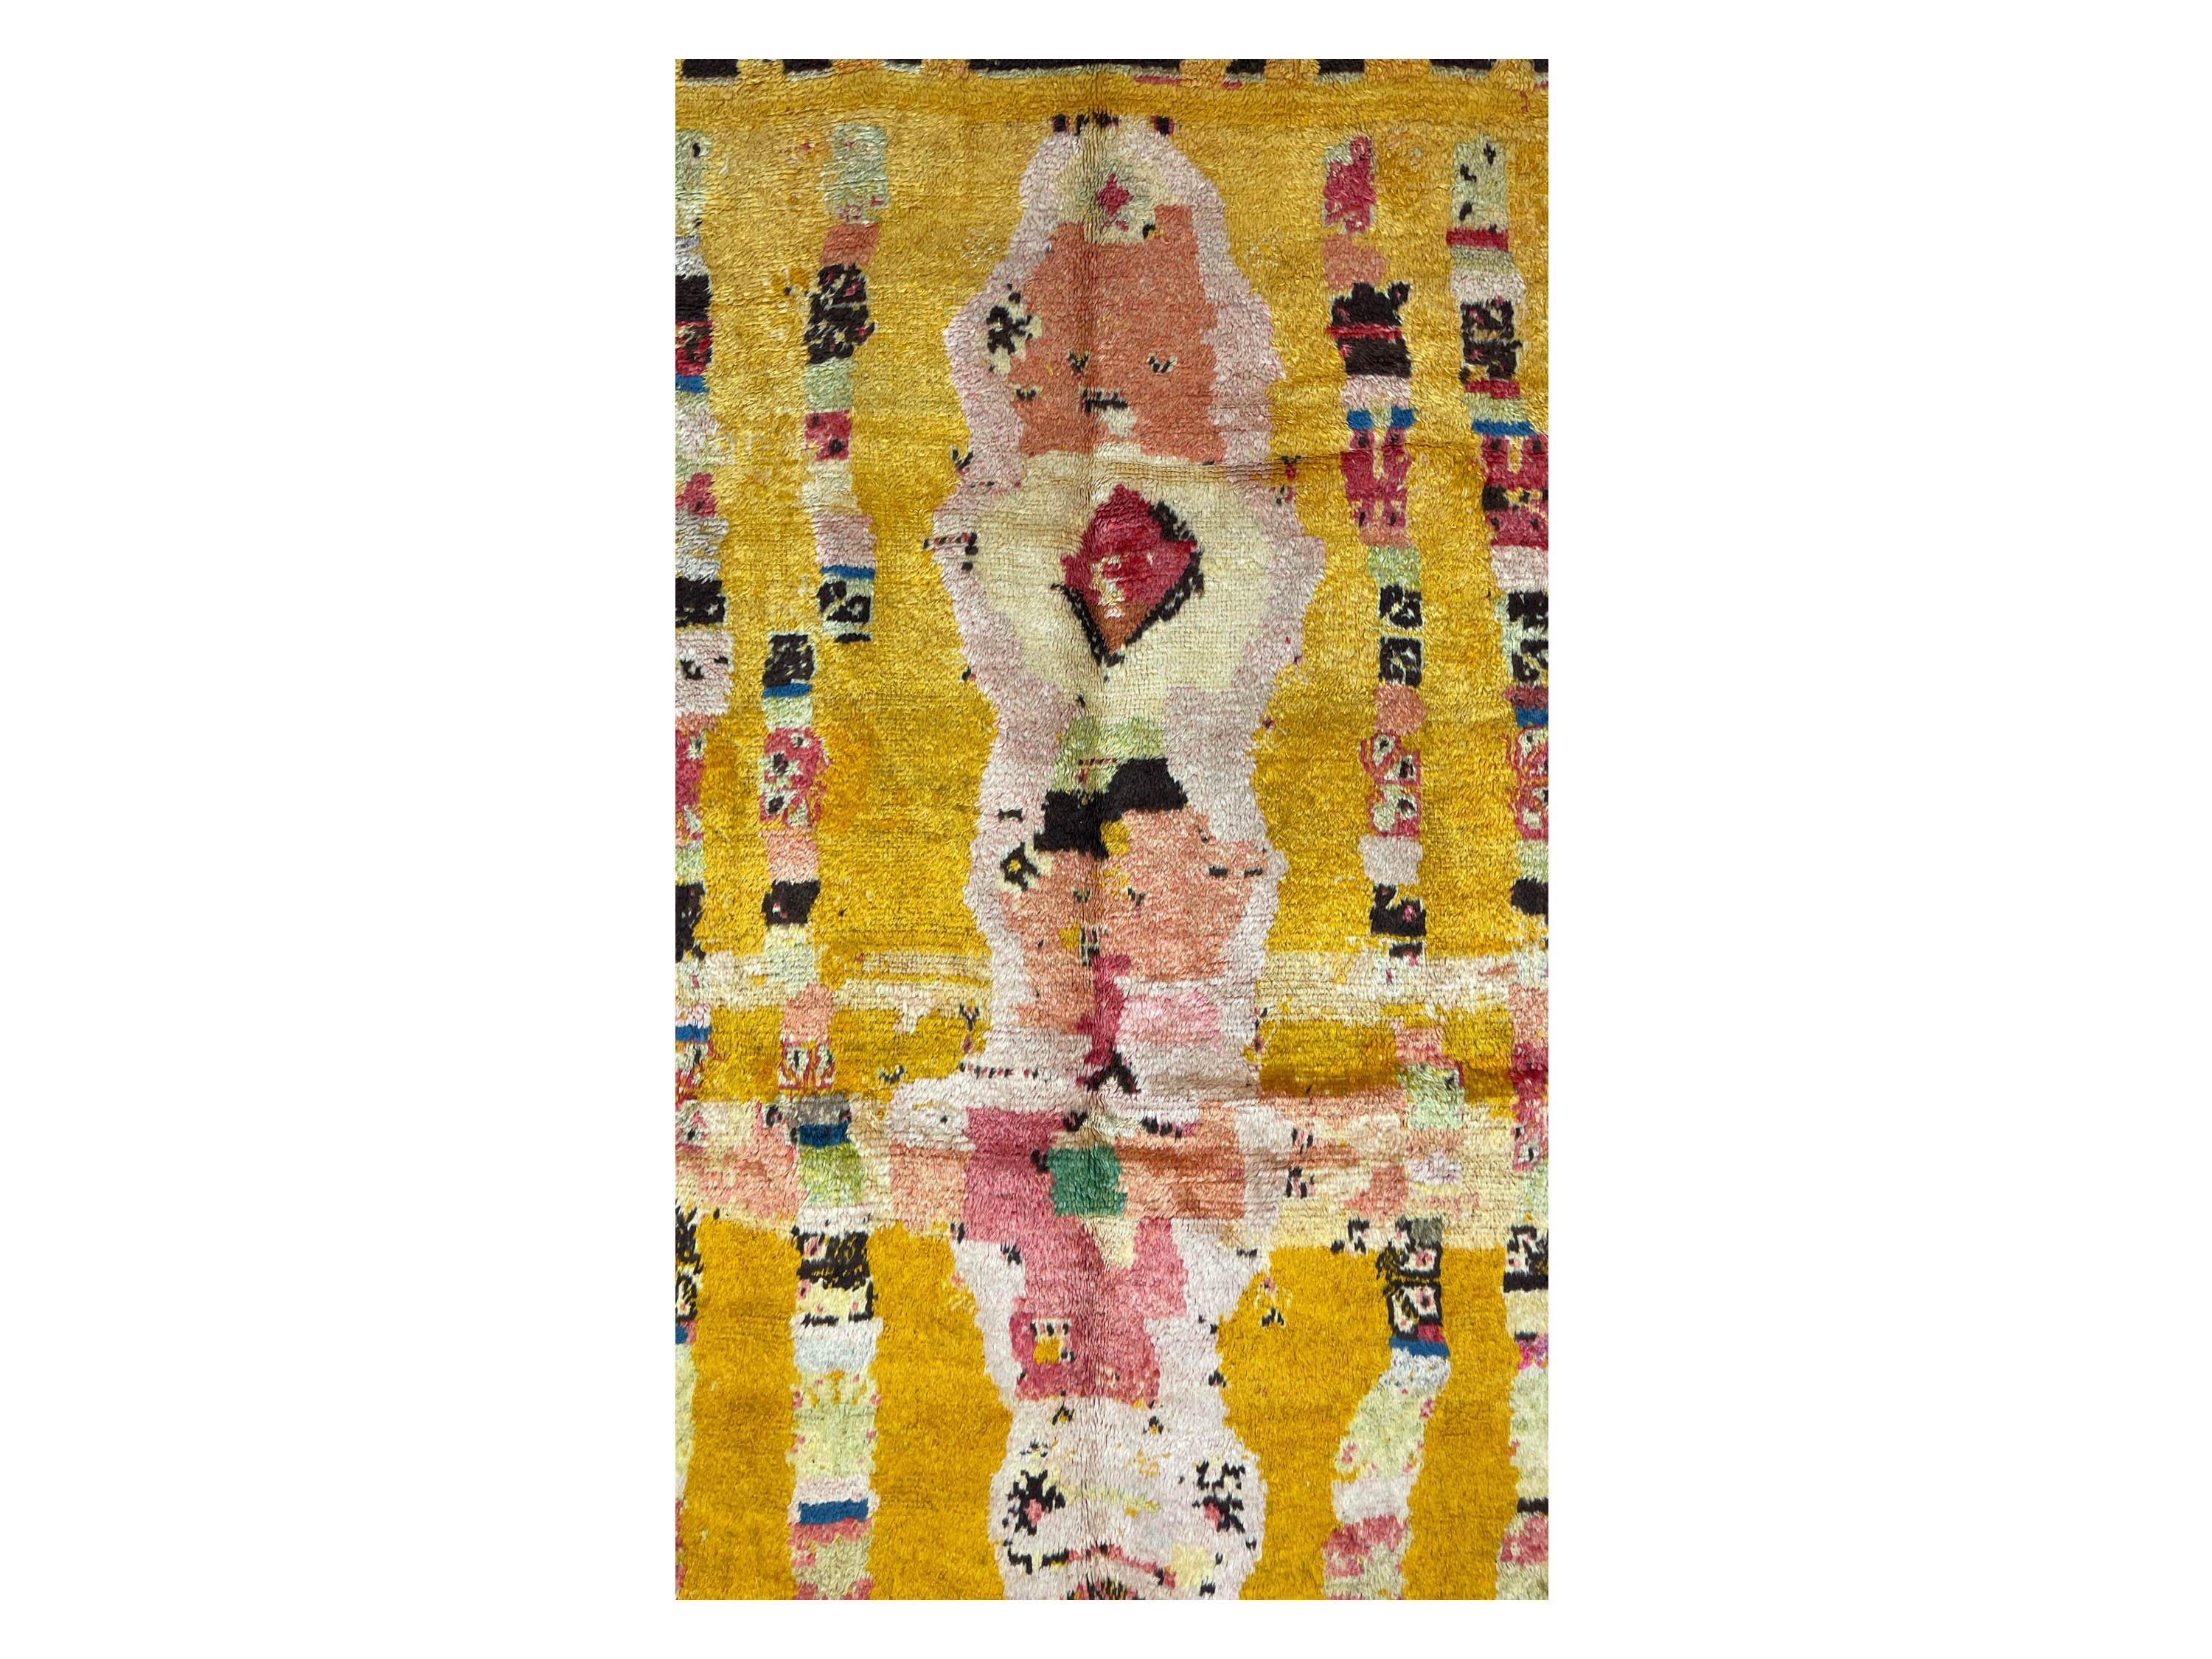 Along with the bright shades of gold and a stunning vintage pattern equalling a piece of art, this tribal rug boasts a rich culture deep within the mountains that will make a statement into any interior. 

“The King” is perfectly described as